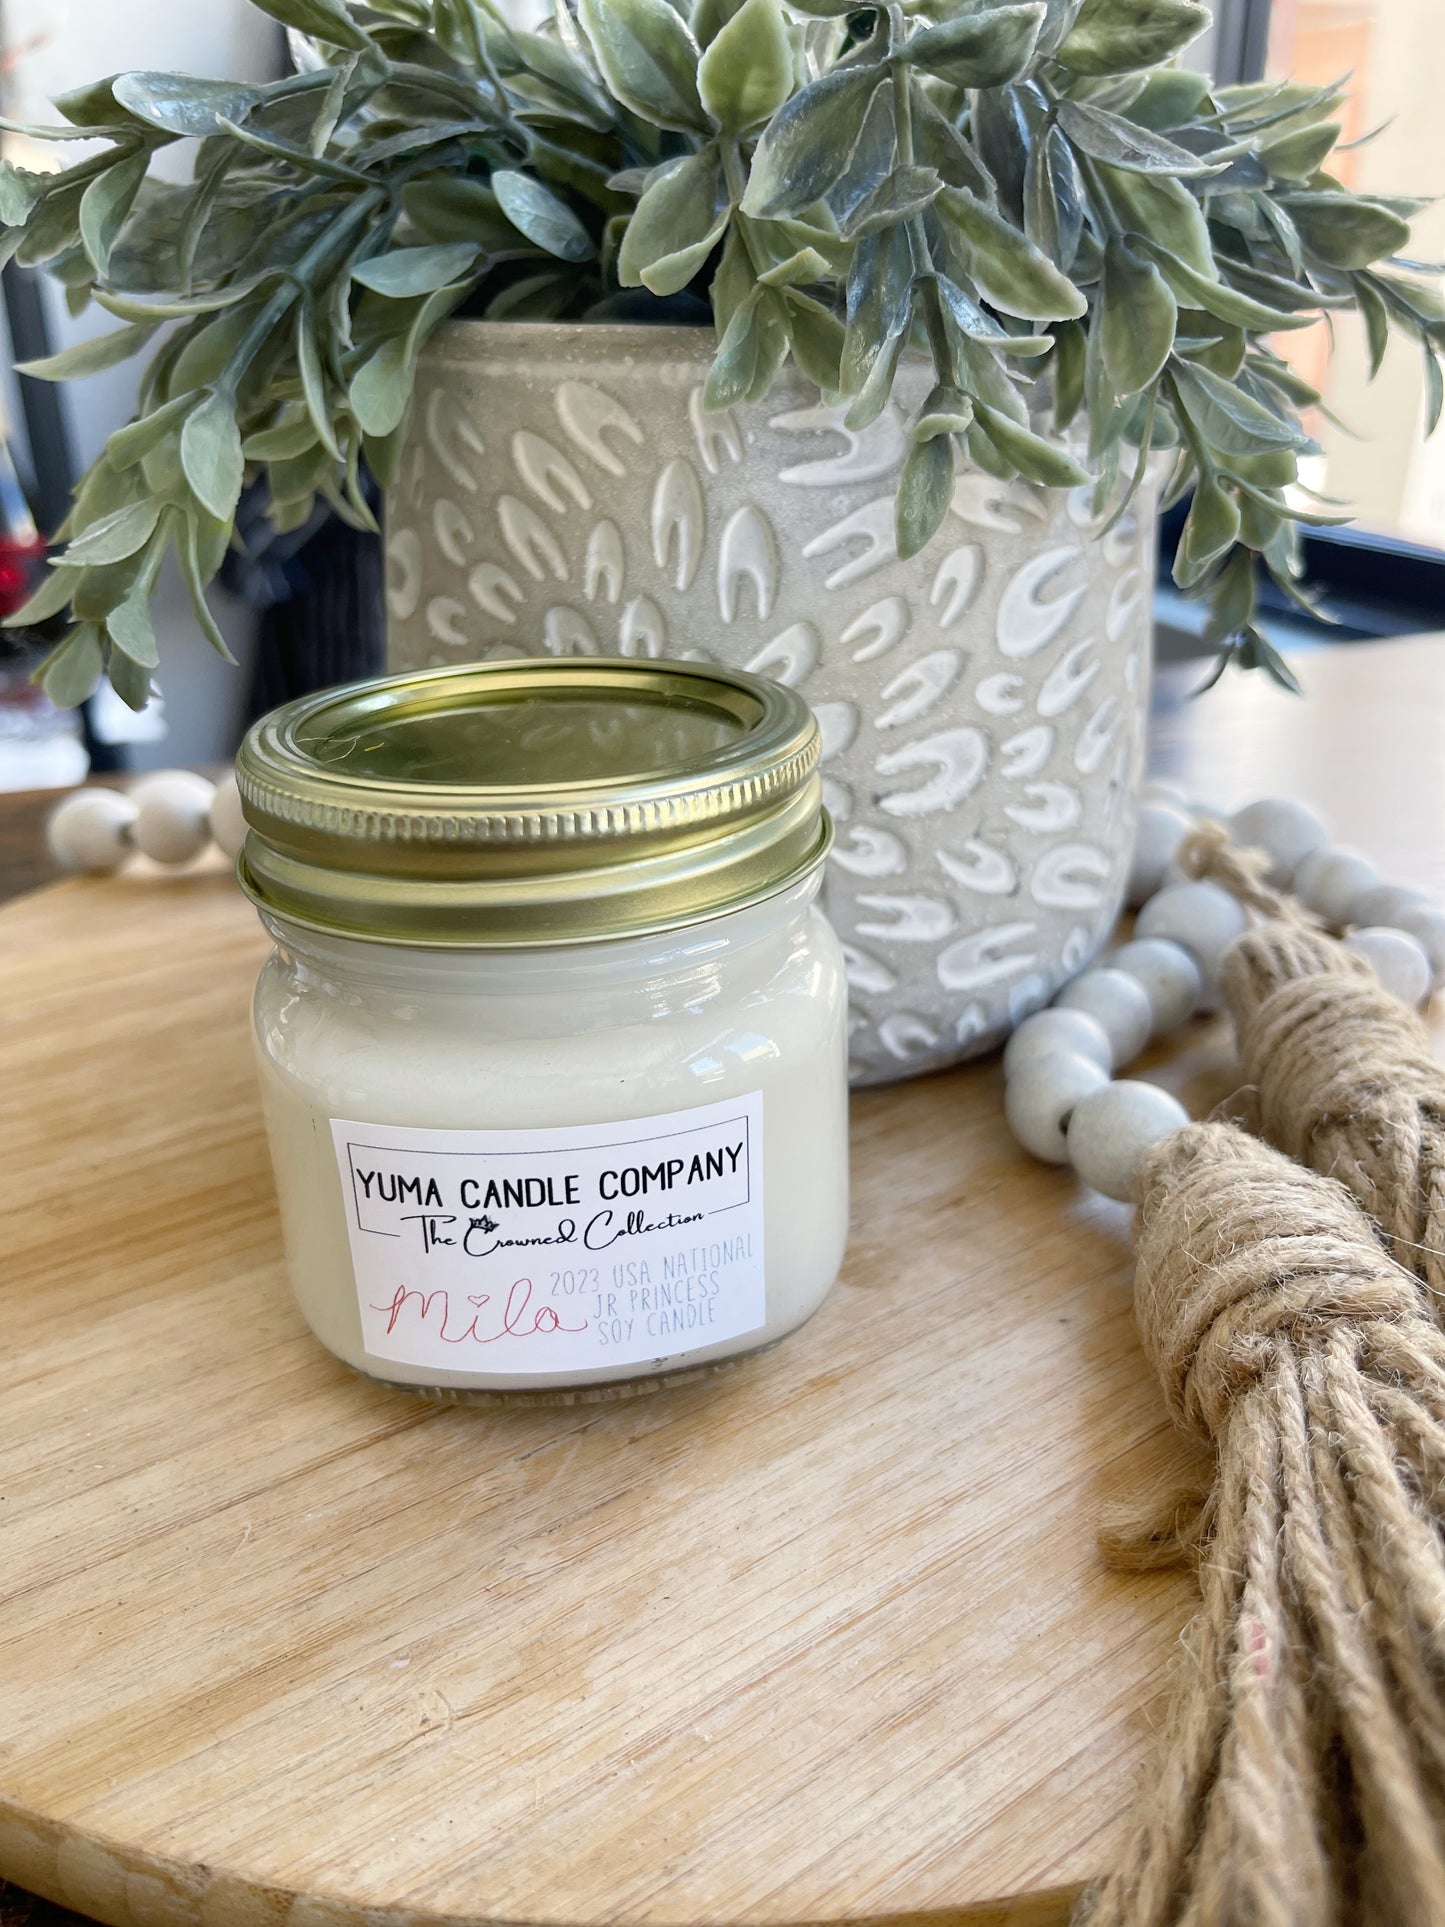 The Mila - Rose Bouquet Soy Candle